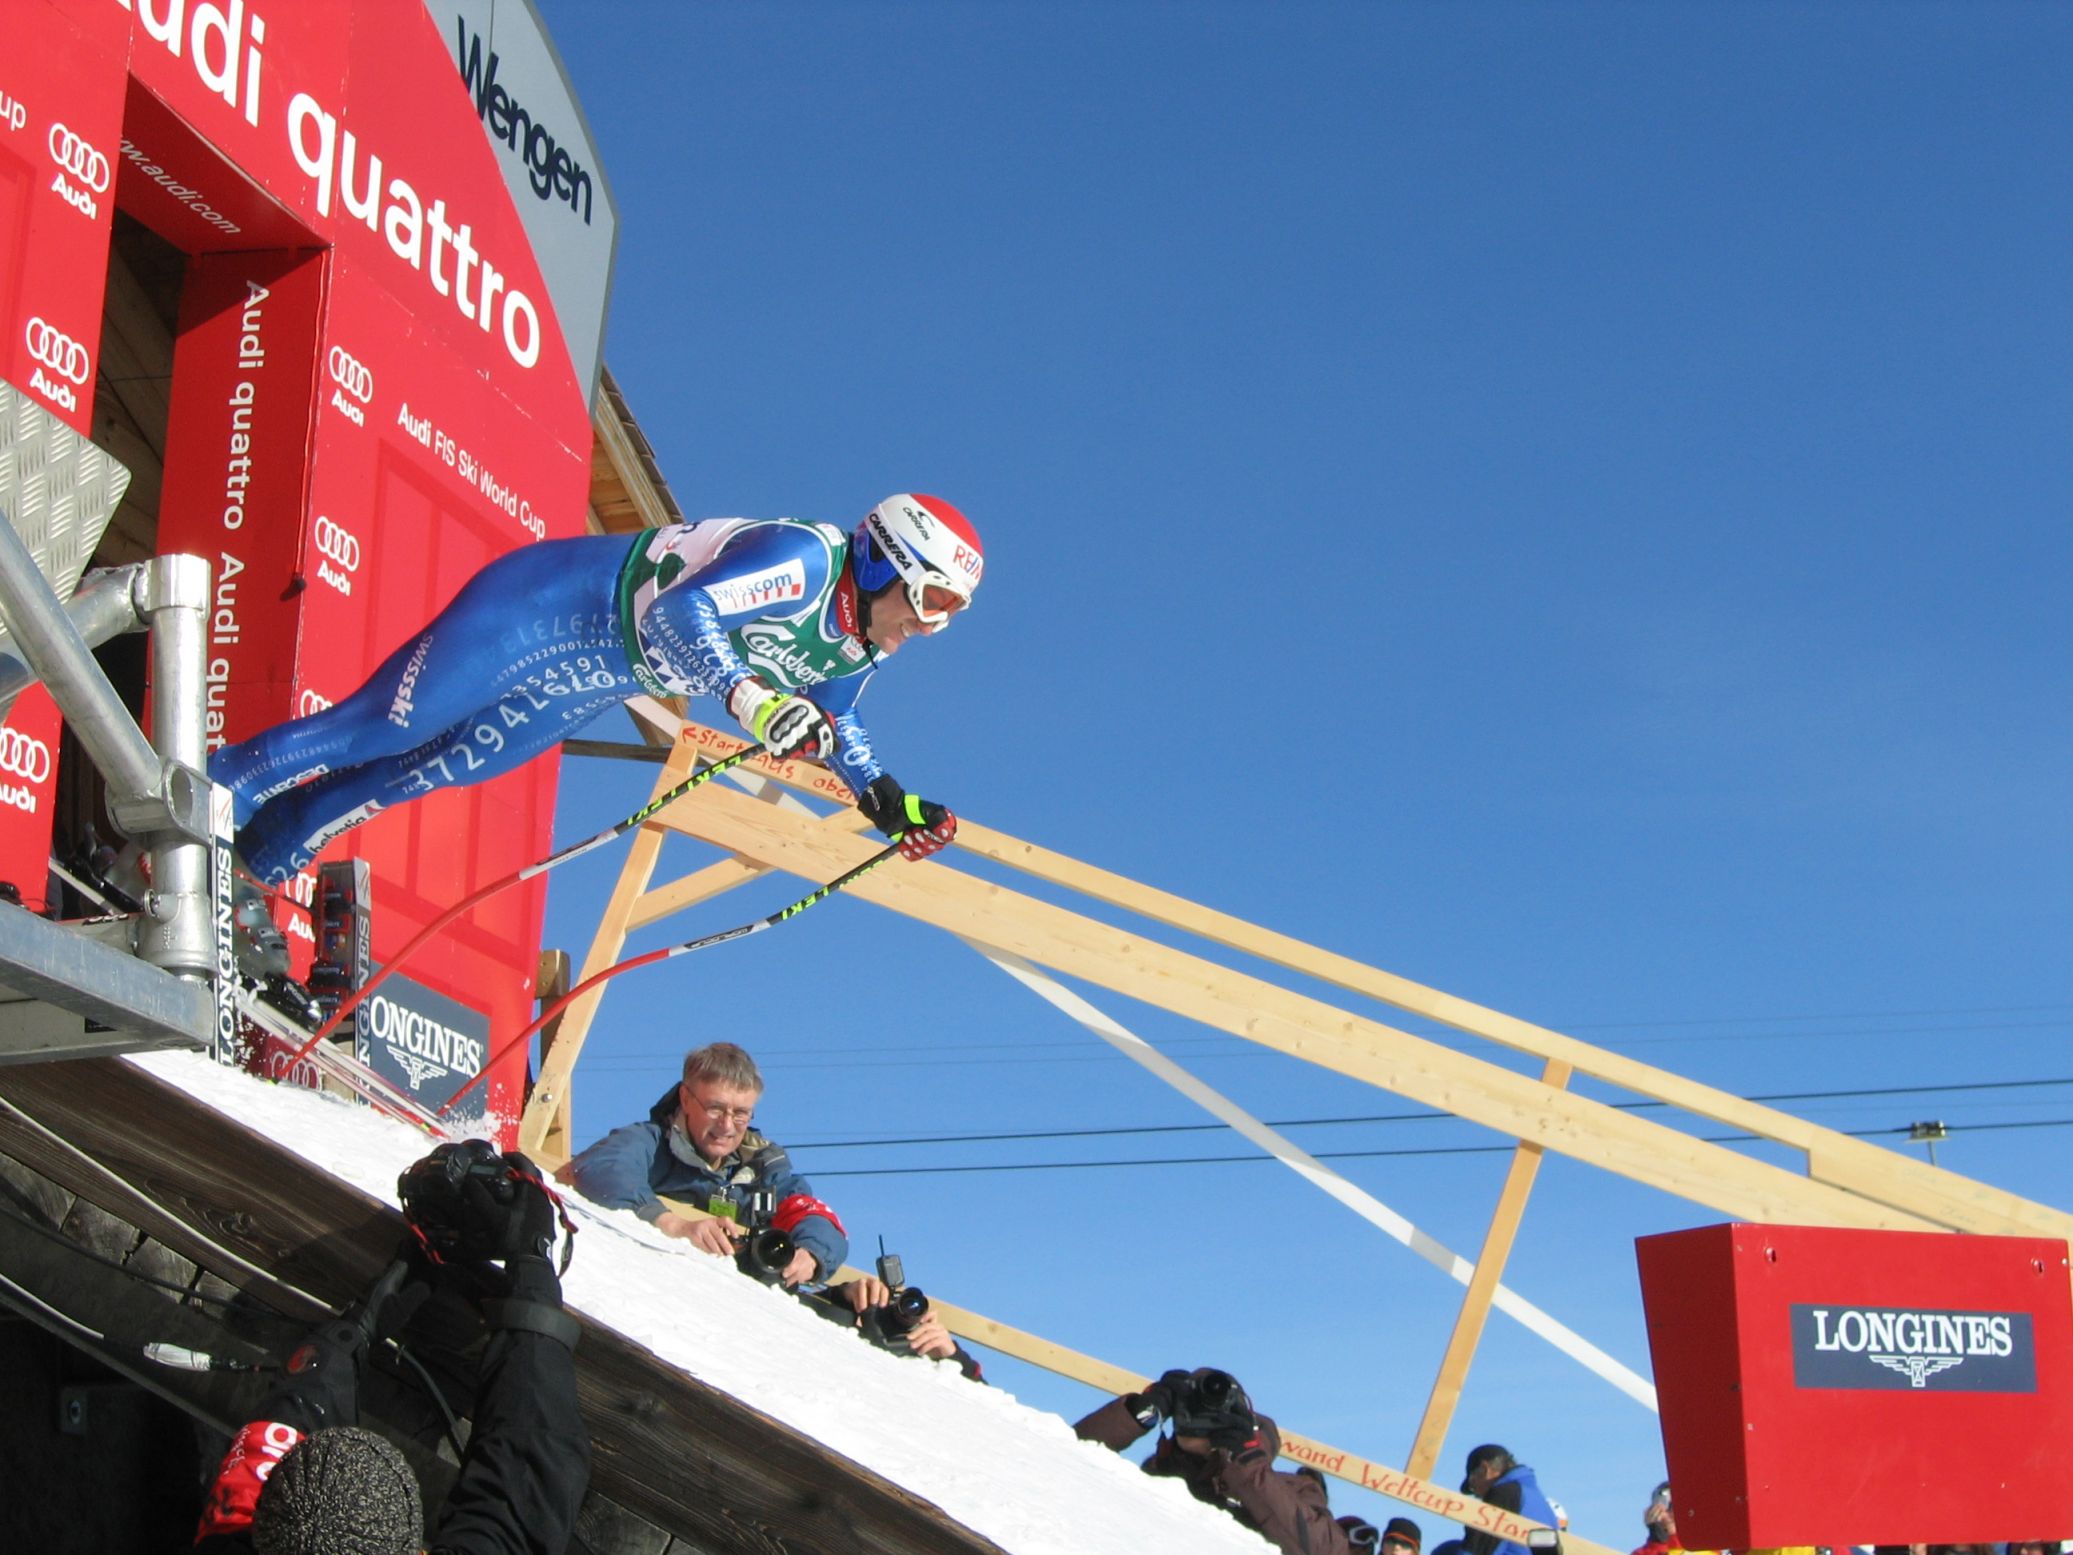 Vip Wengen World Cup Ski Experience Epic Europe